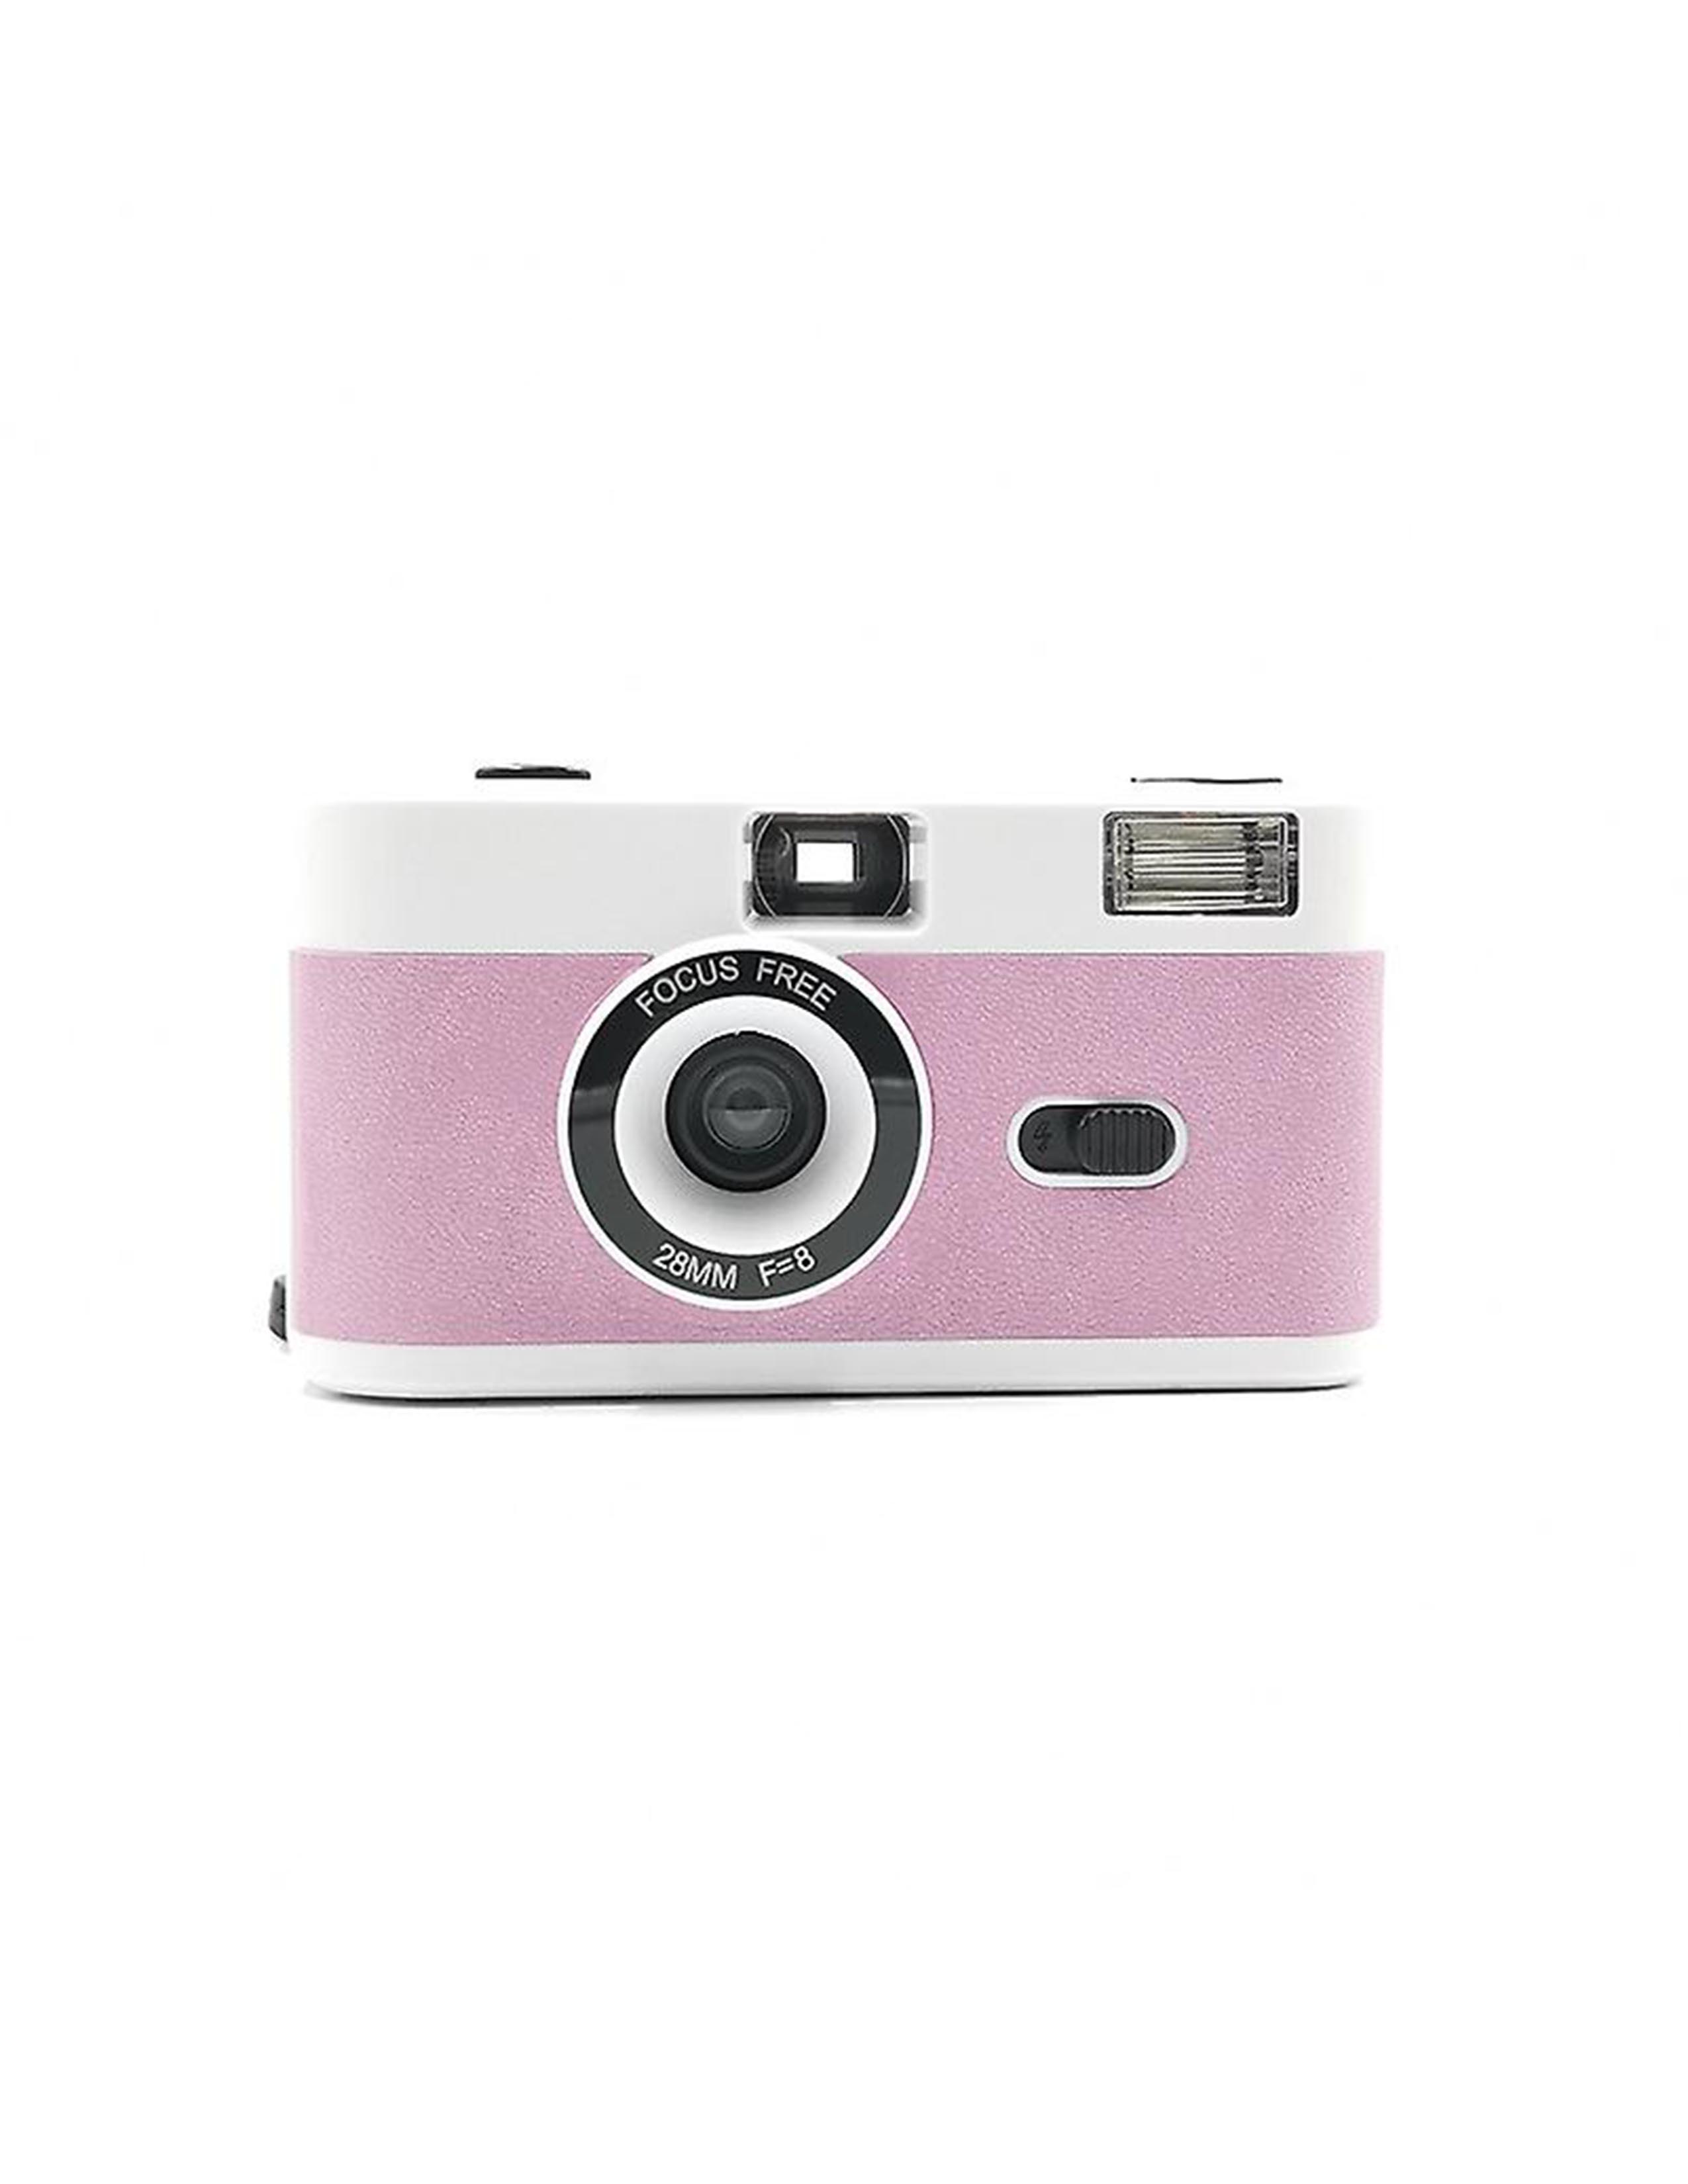 Lola Retro Reusable 35mm Film Camera, Pink and White